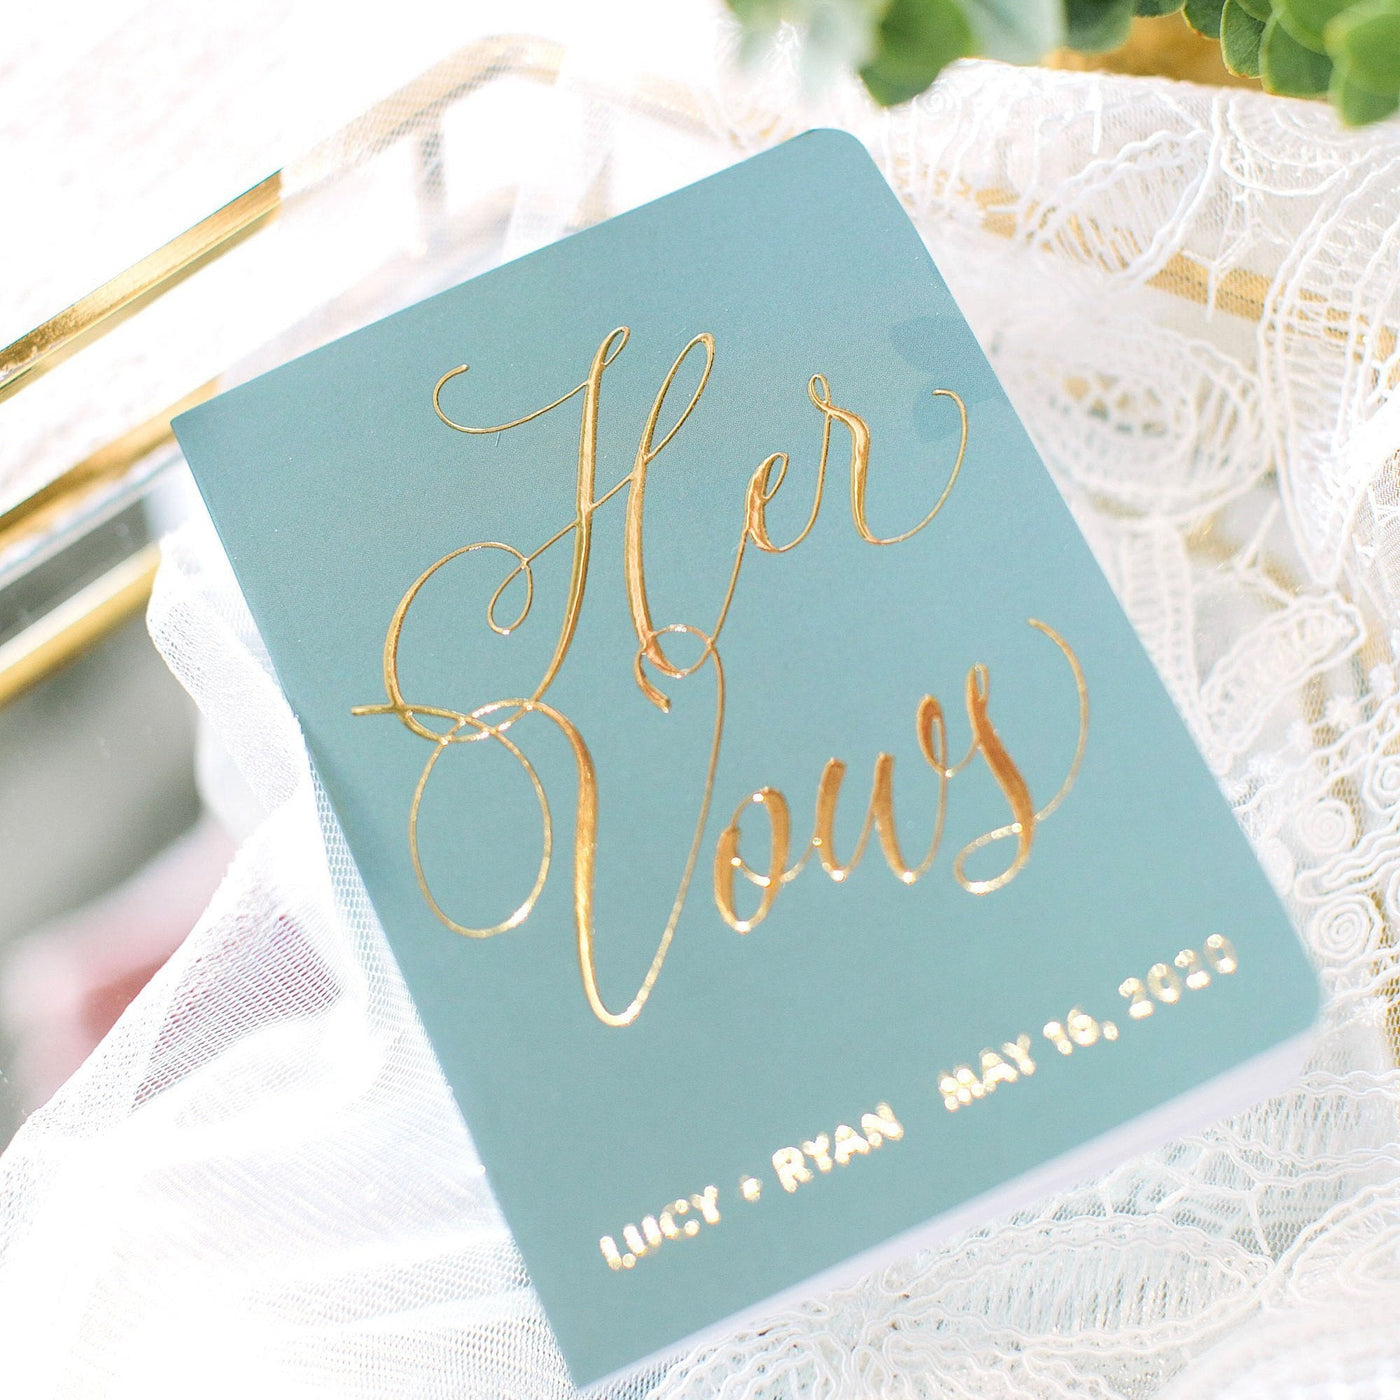 Personalized Vow Books